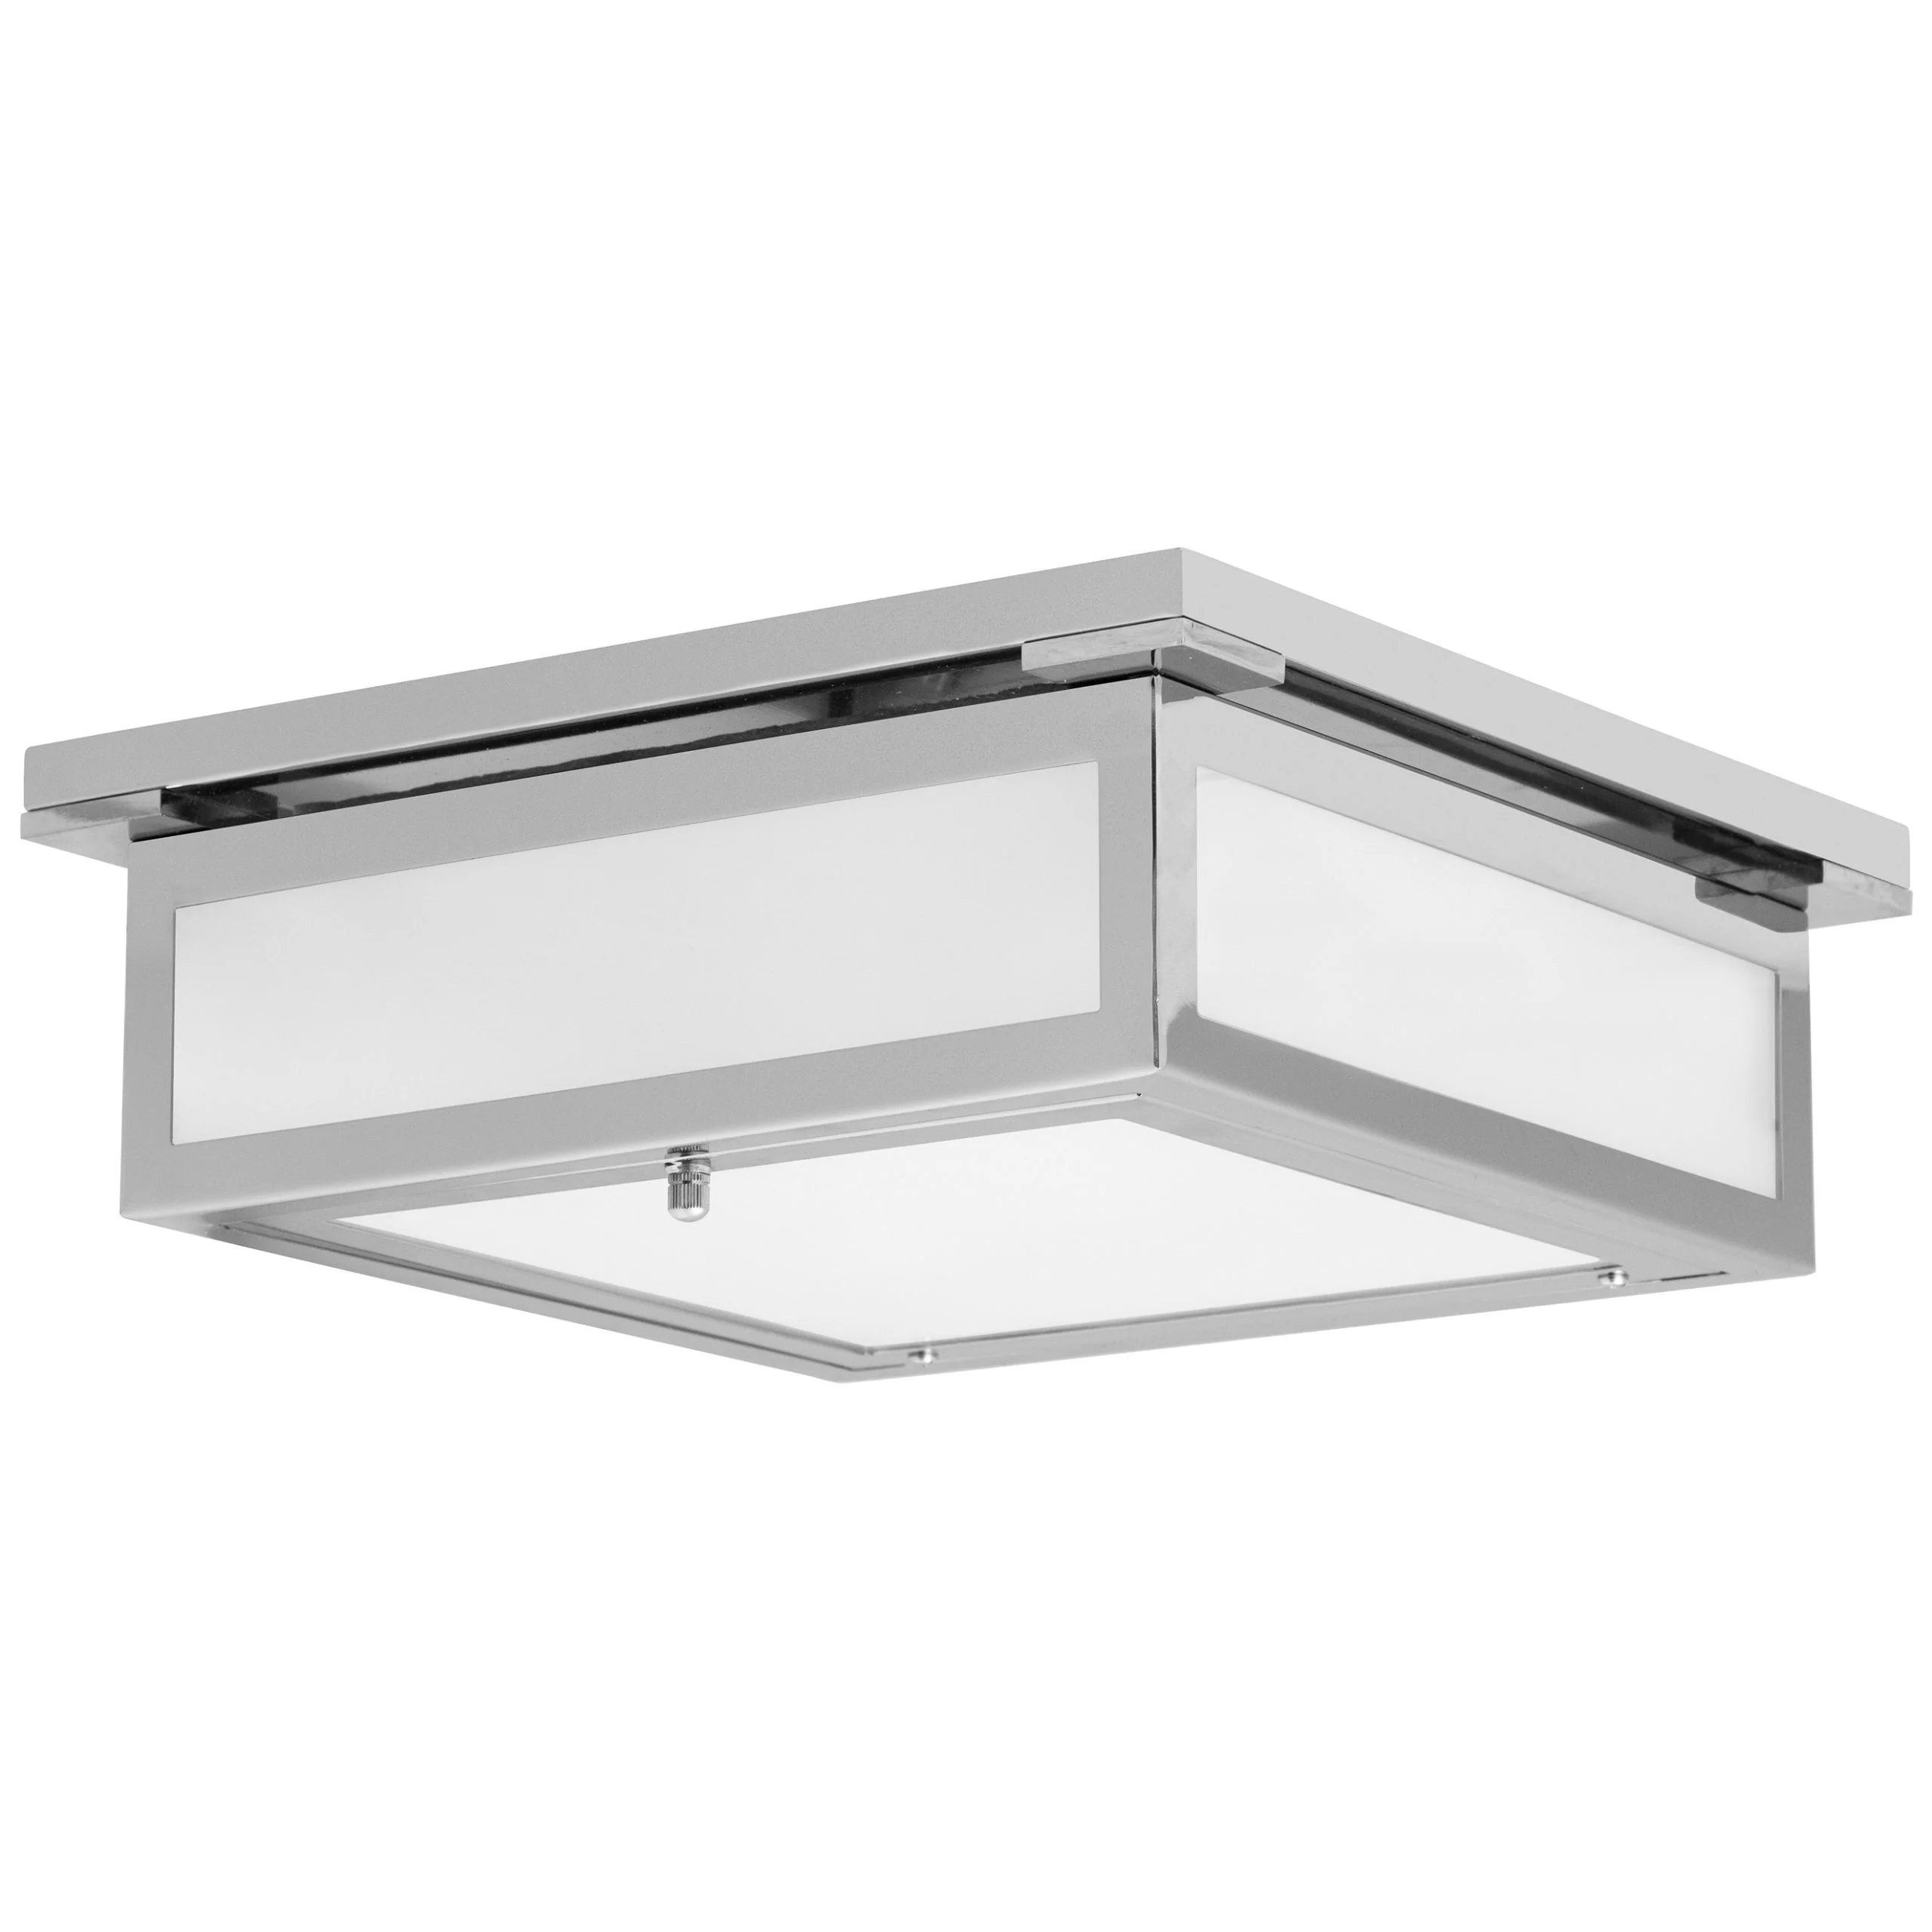 12"W Polished Chrome Ceiling Light with Frosted Glass Shade